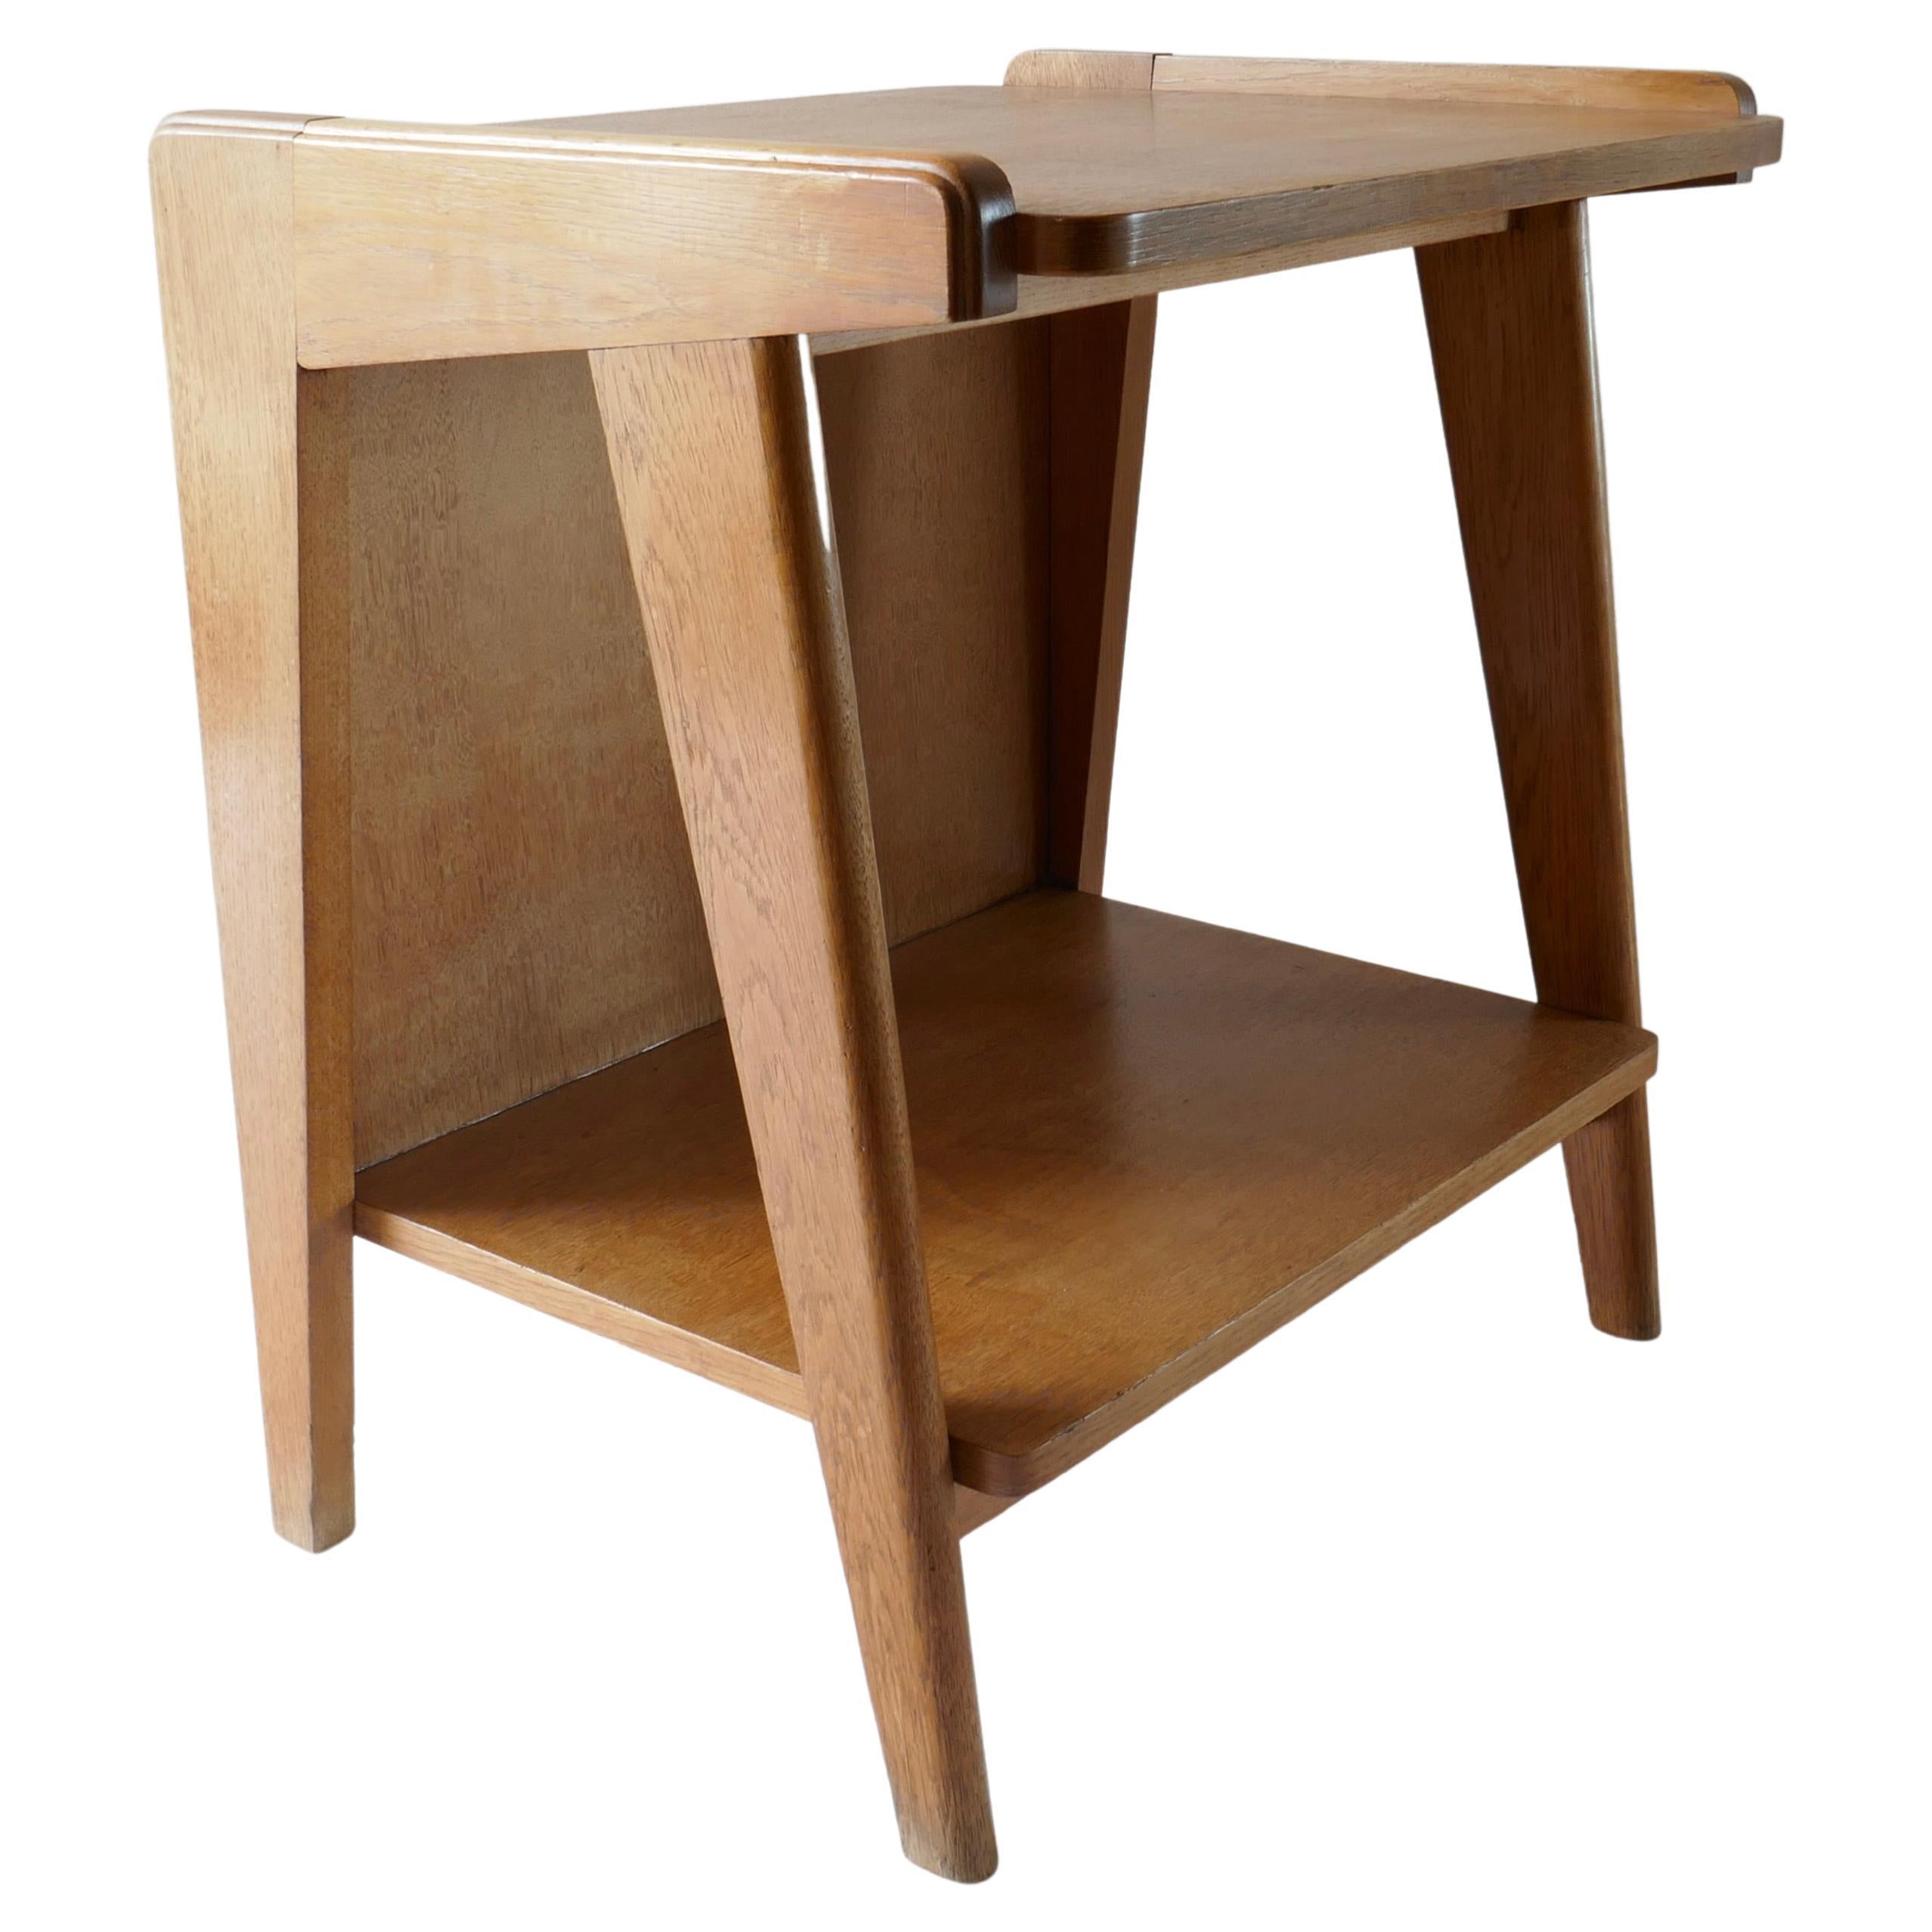 Guillerme & Chambron Oak Side Table or Night Stand, France, 1960s For Sale